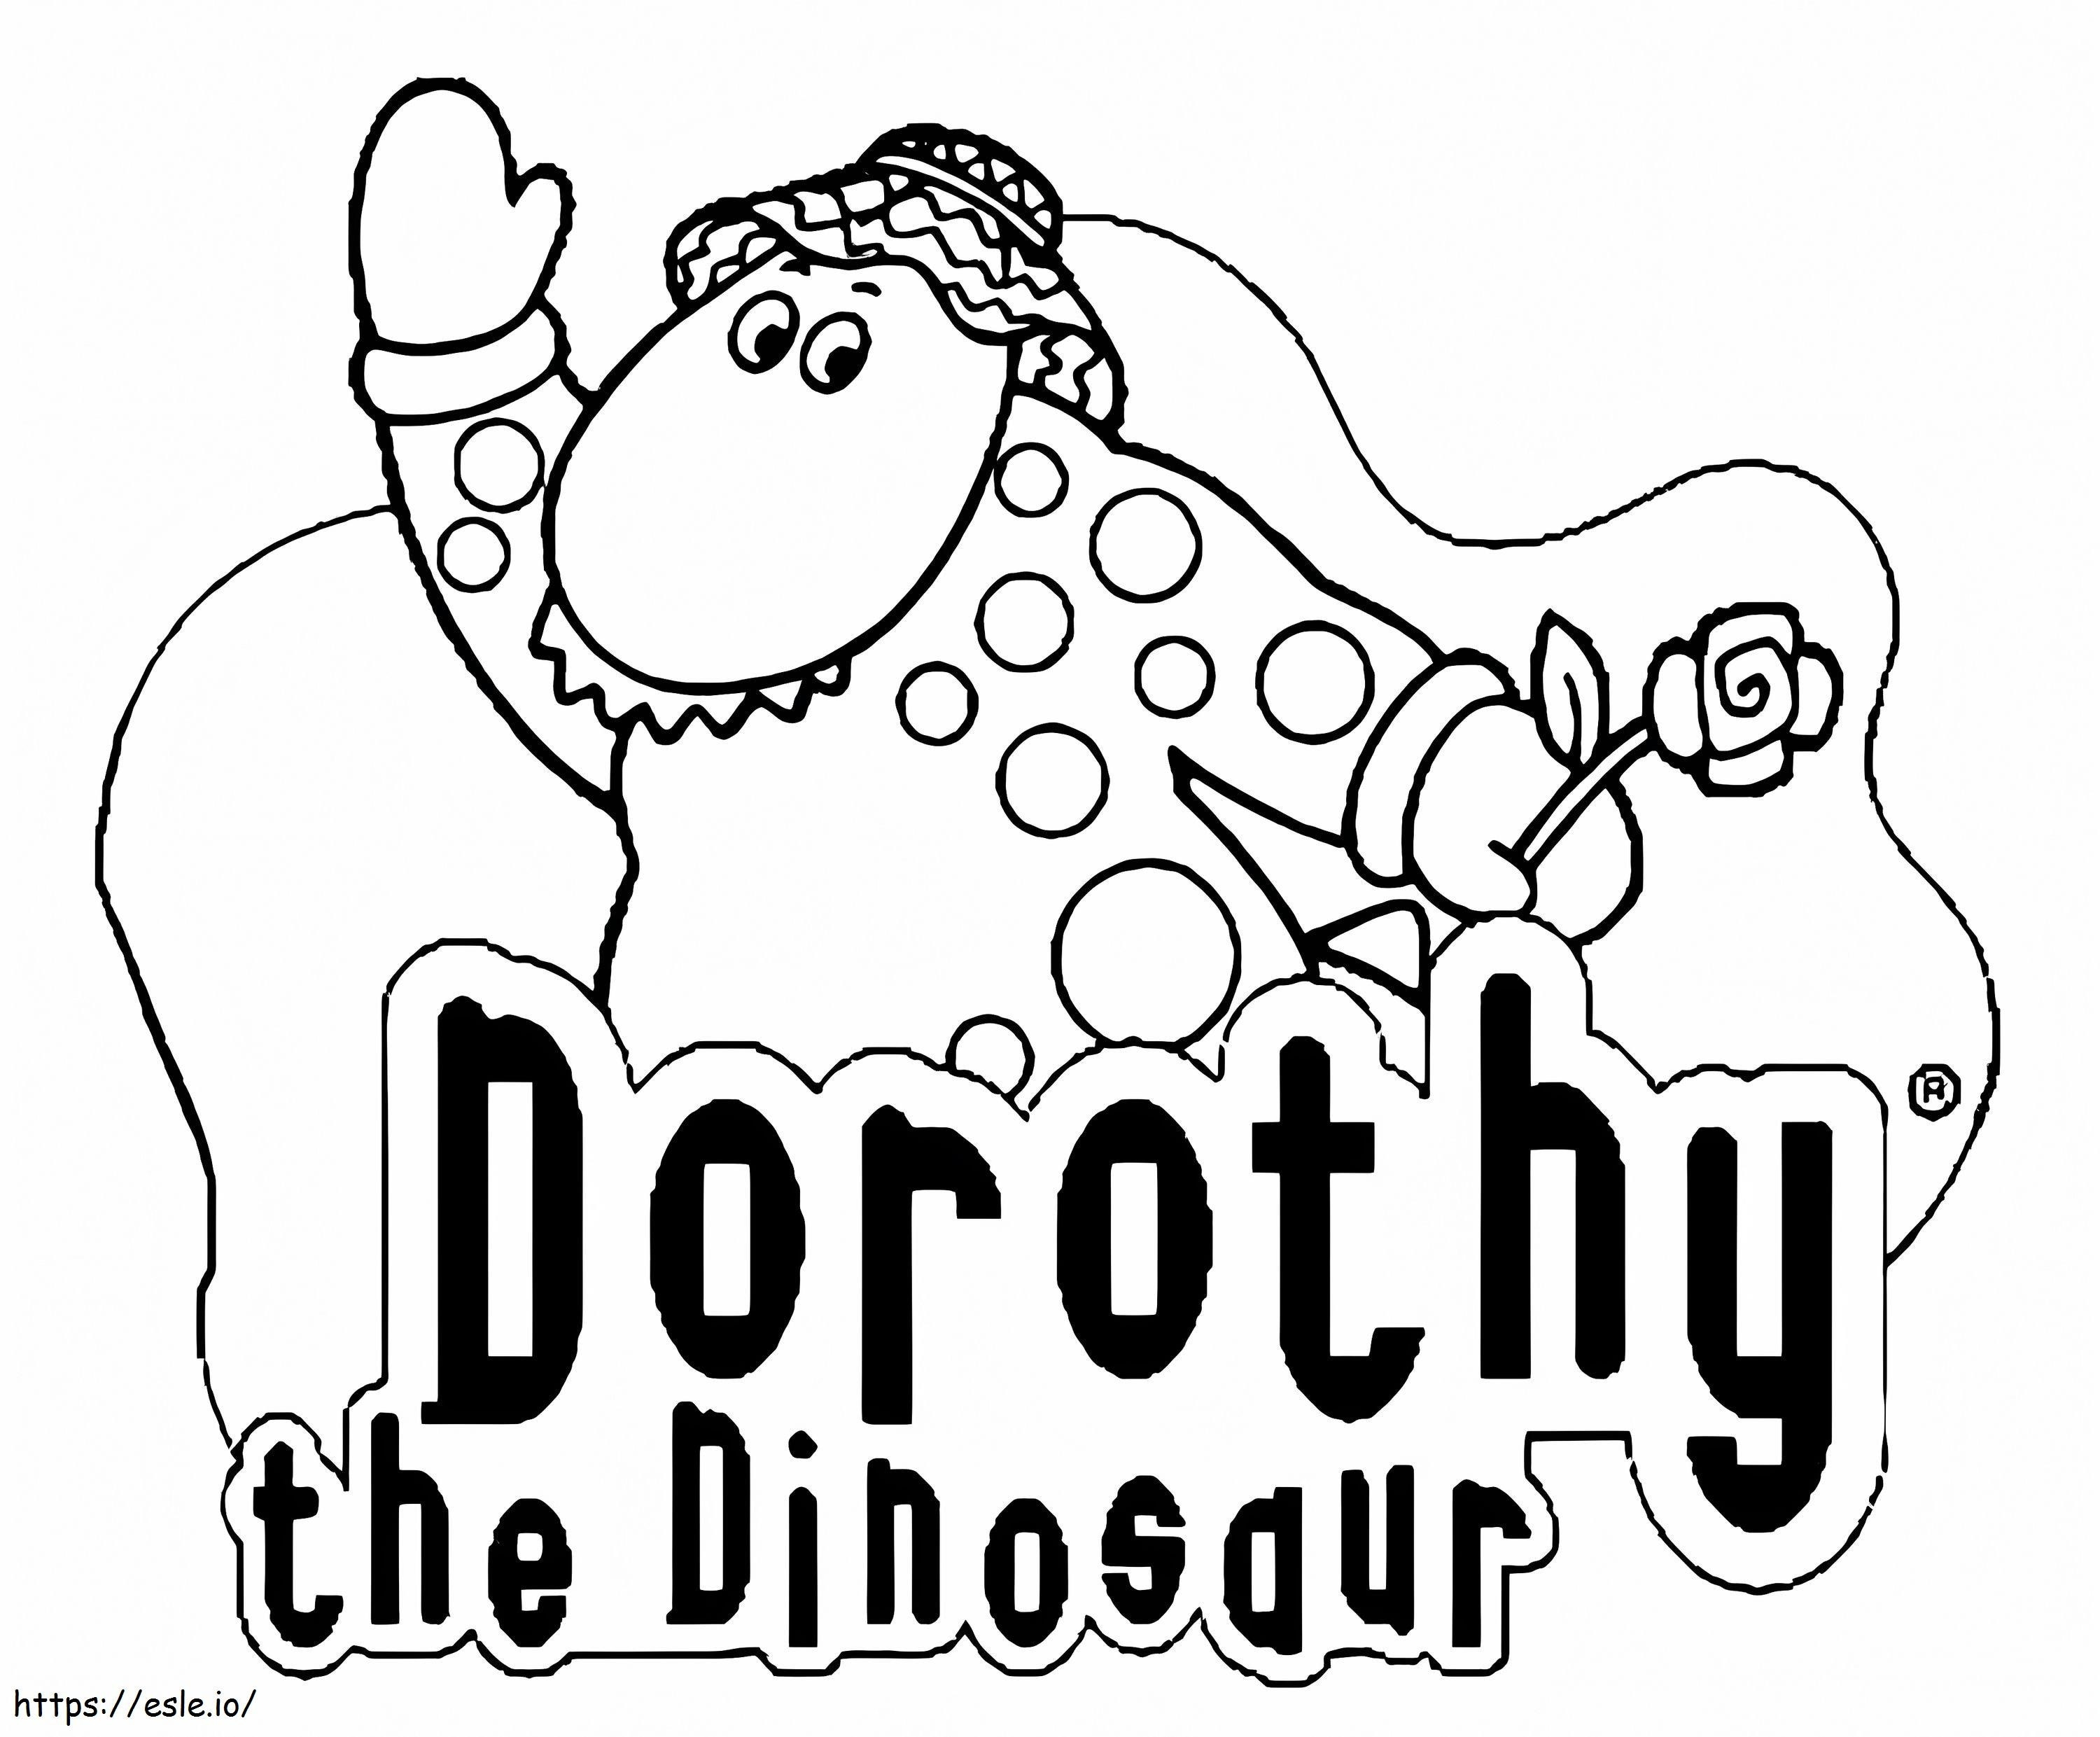 Dorothy In Wiggles coloring page